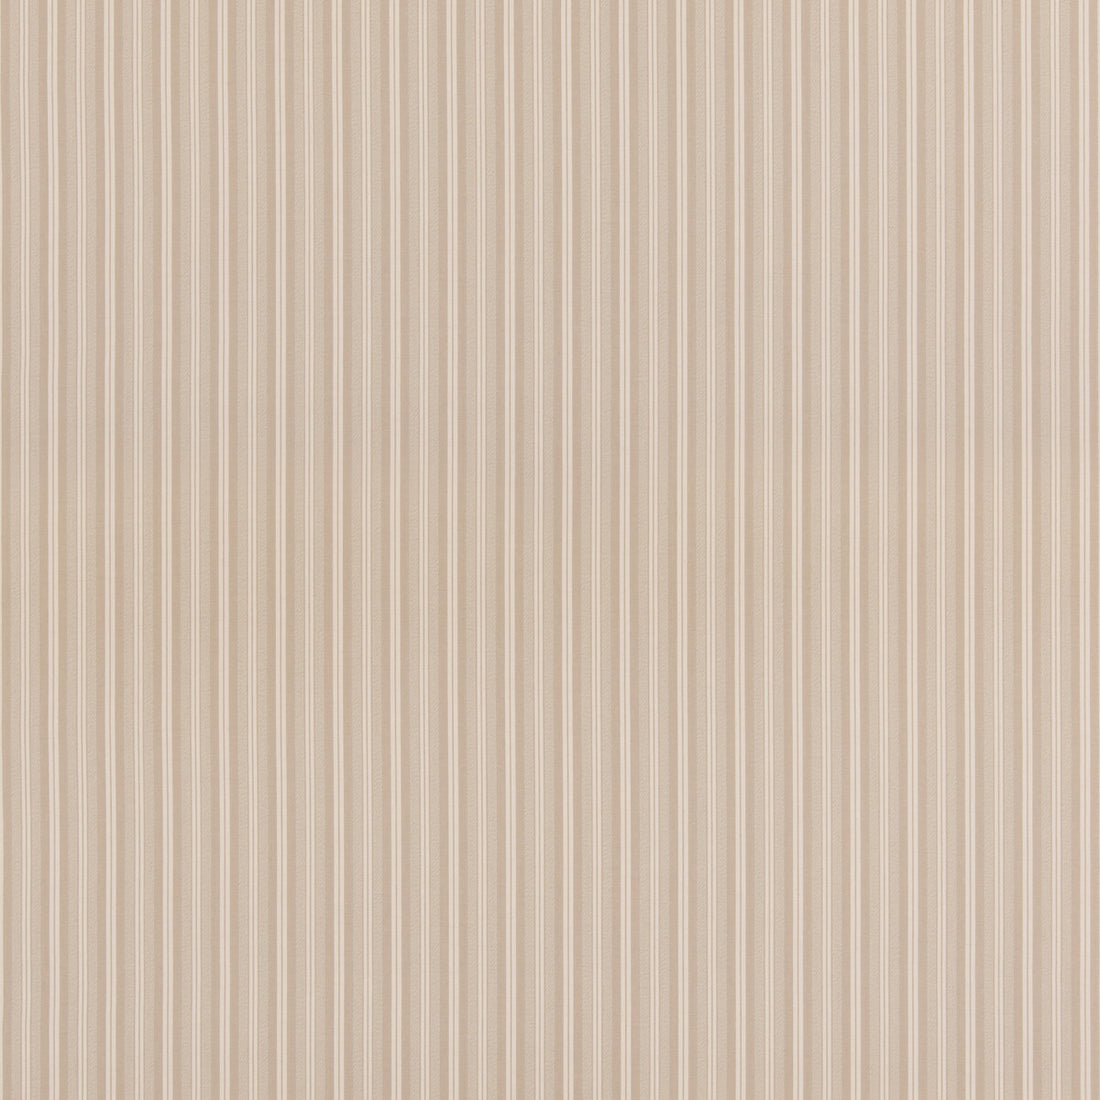 Laverton Stripe fabric in linen color - pattern BF11037.110.0 - by G P &amp; J Baker in the Baker House Plain &amp; Stripe II collection